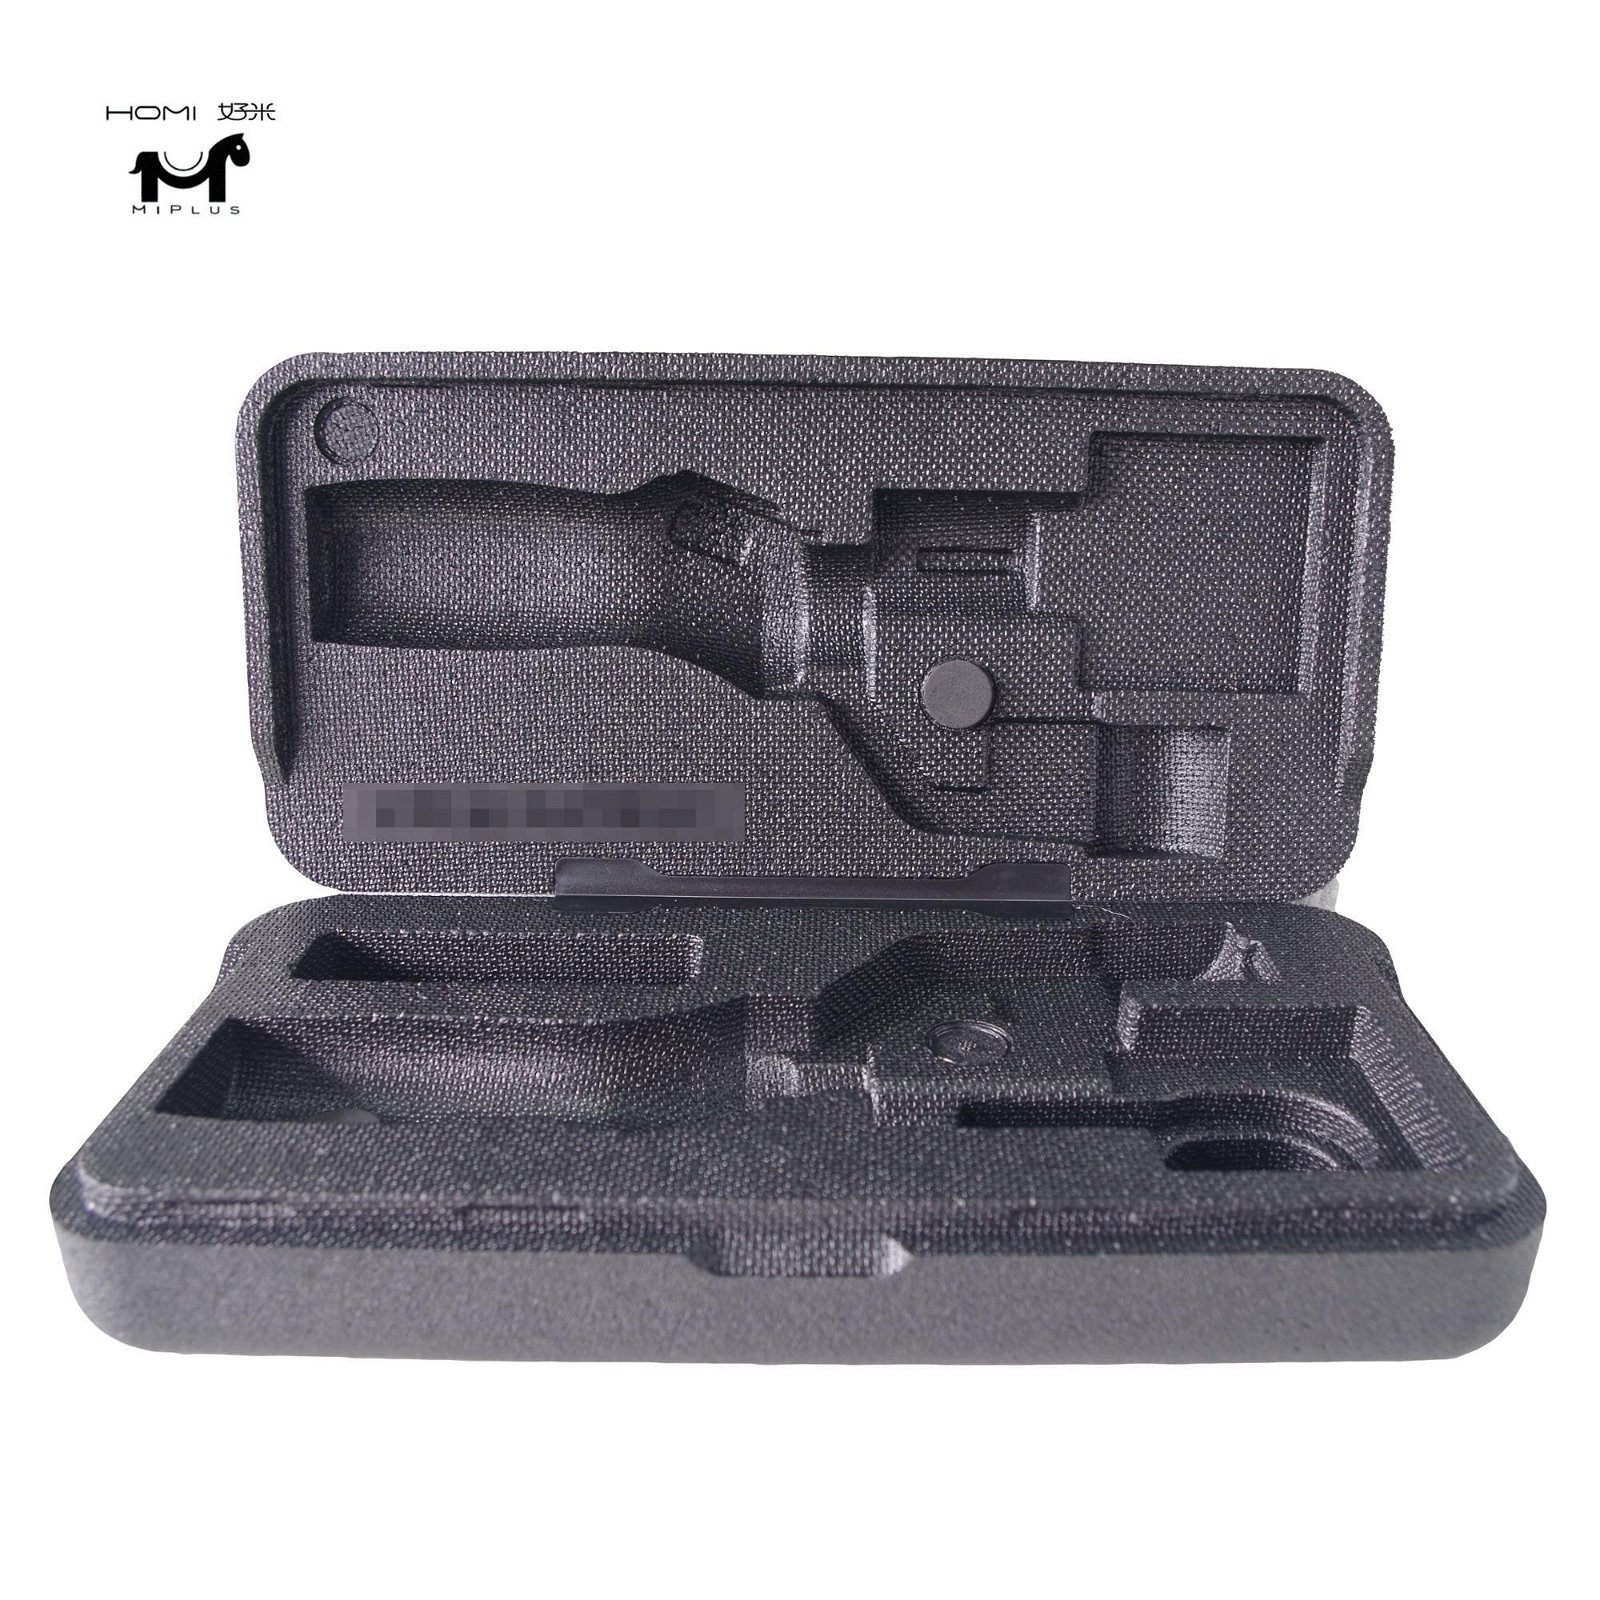 Shock-proof protective EPP foam packing box for UAV, drone, Quadcopter